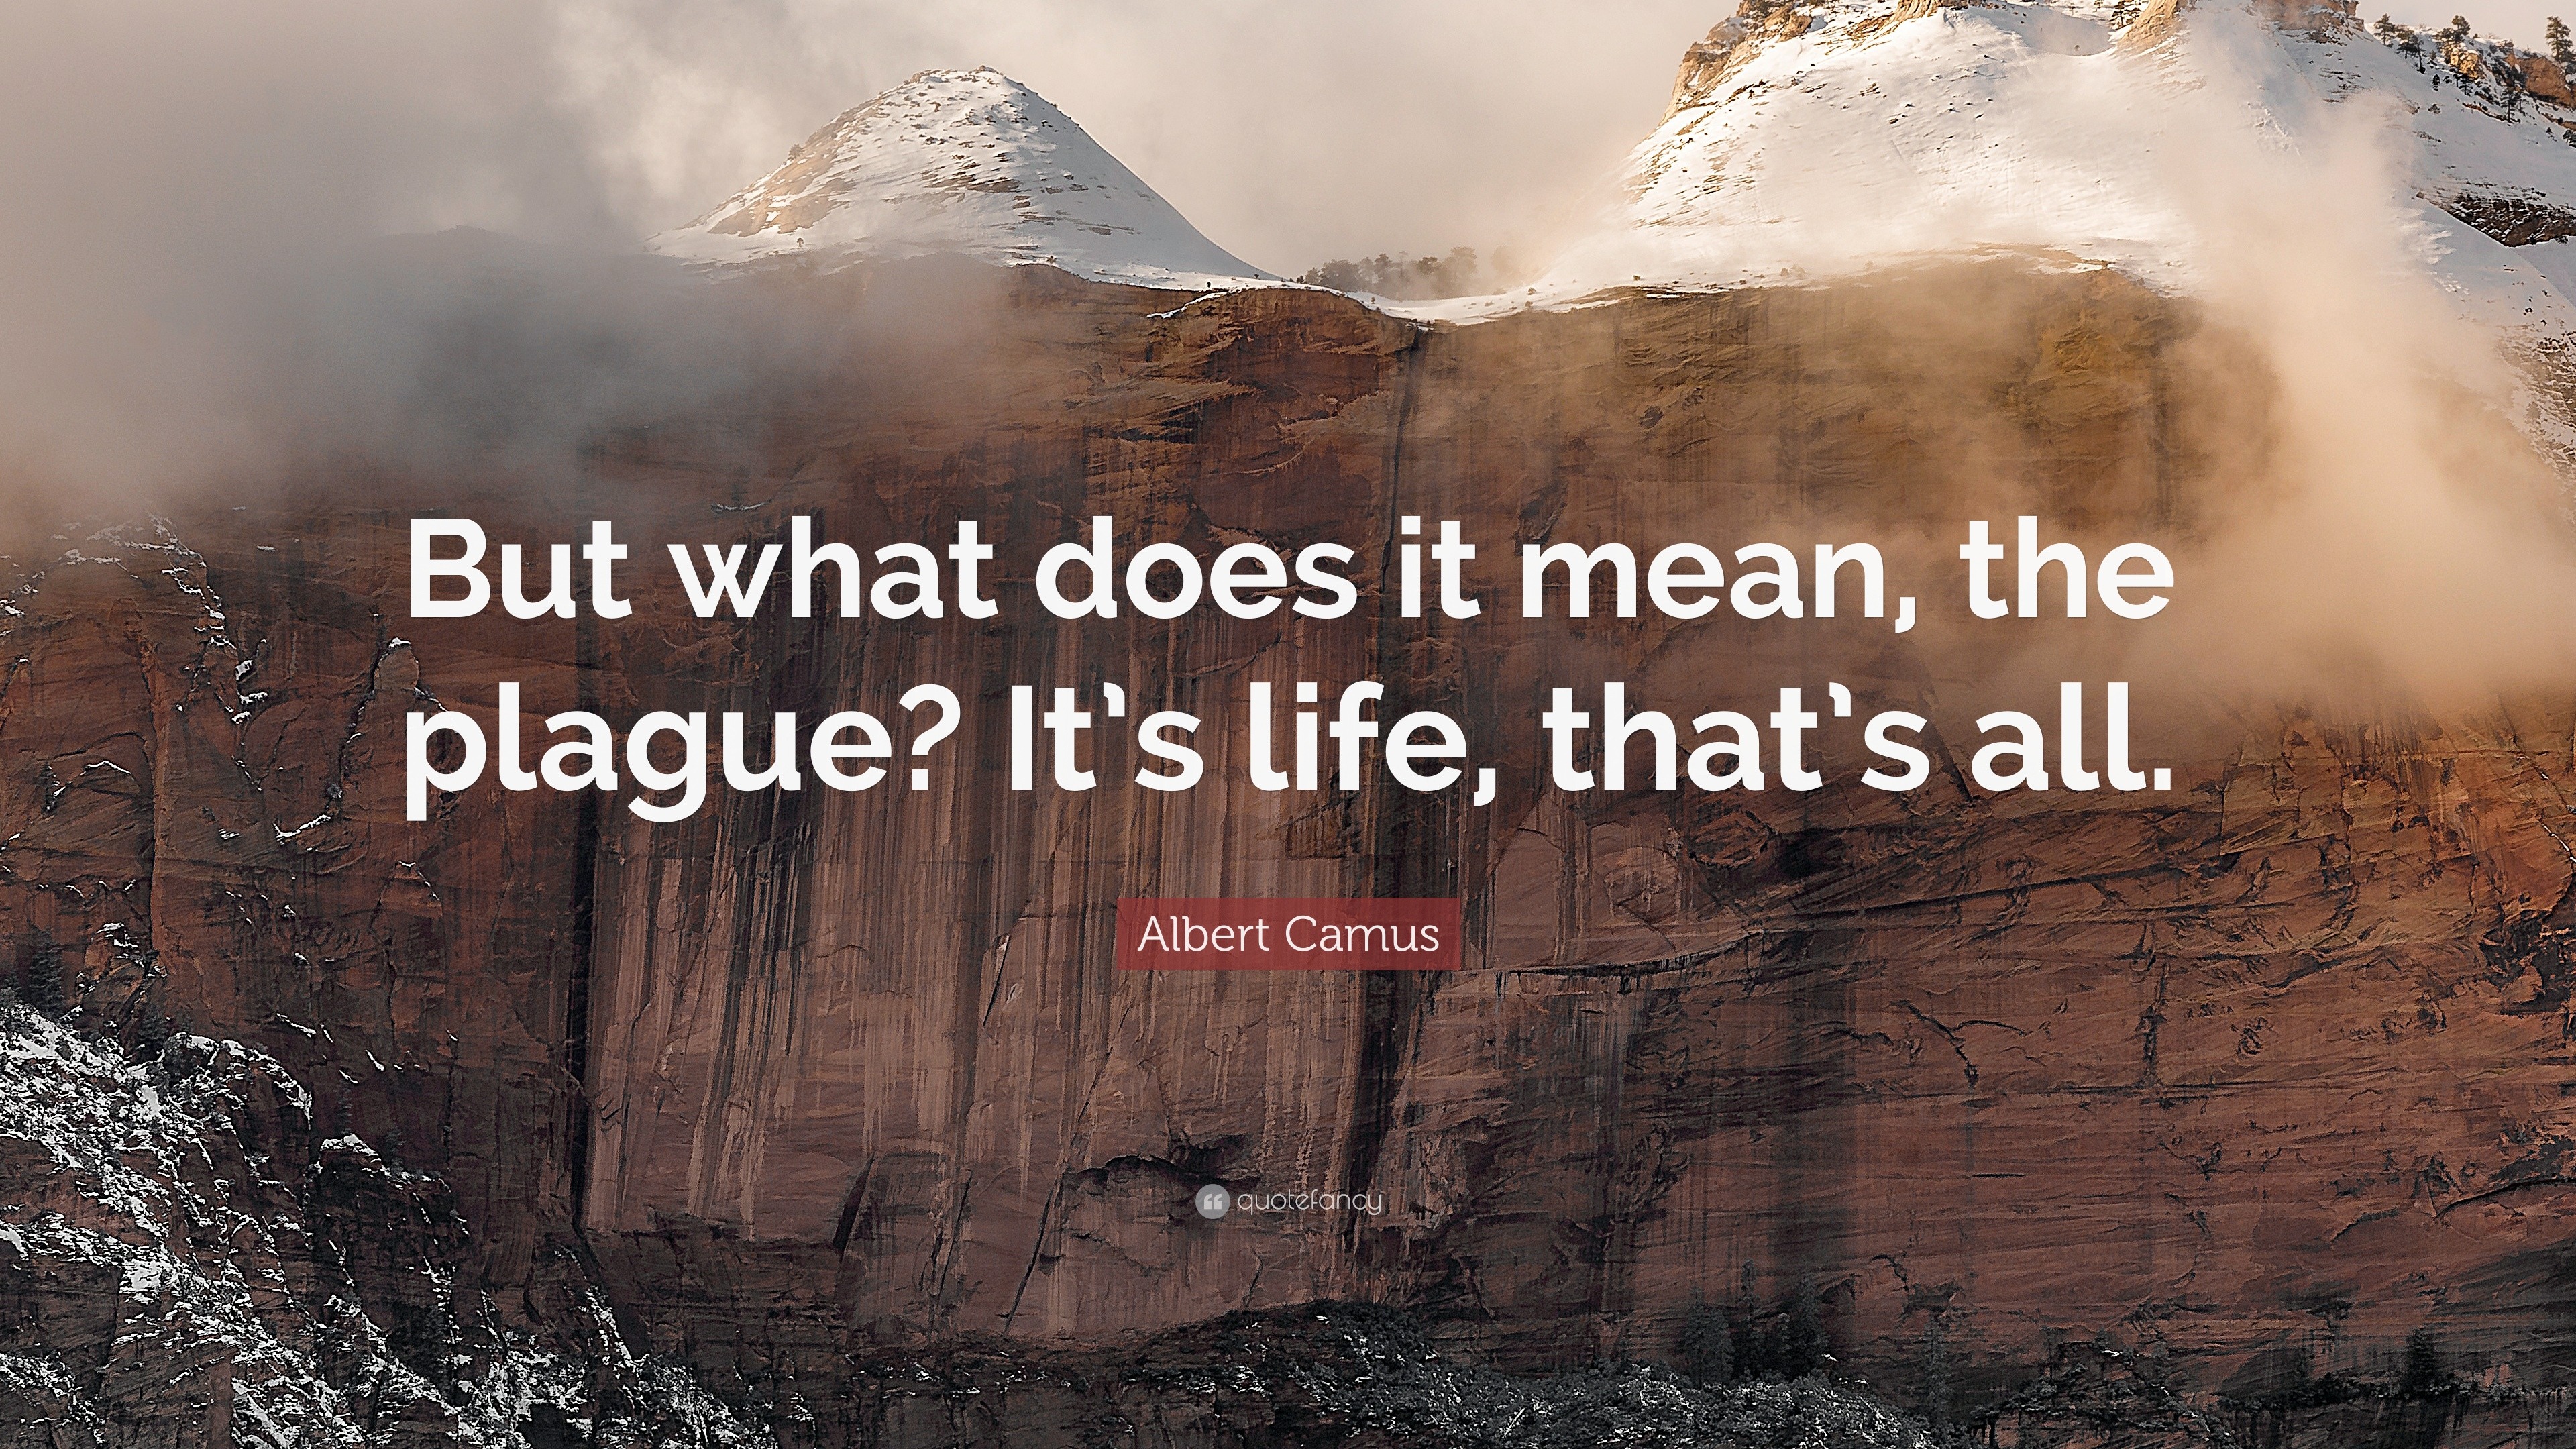 1797134 Albert Camus Quote But what does it mean the plague It s life that